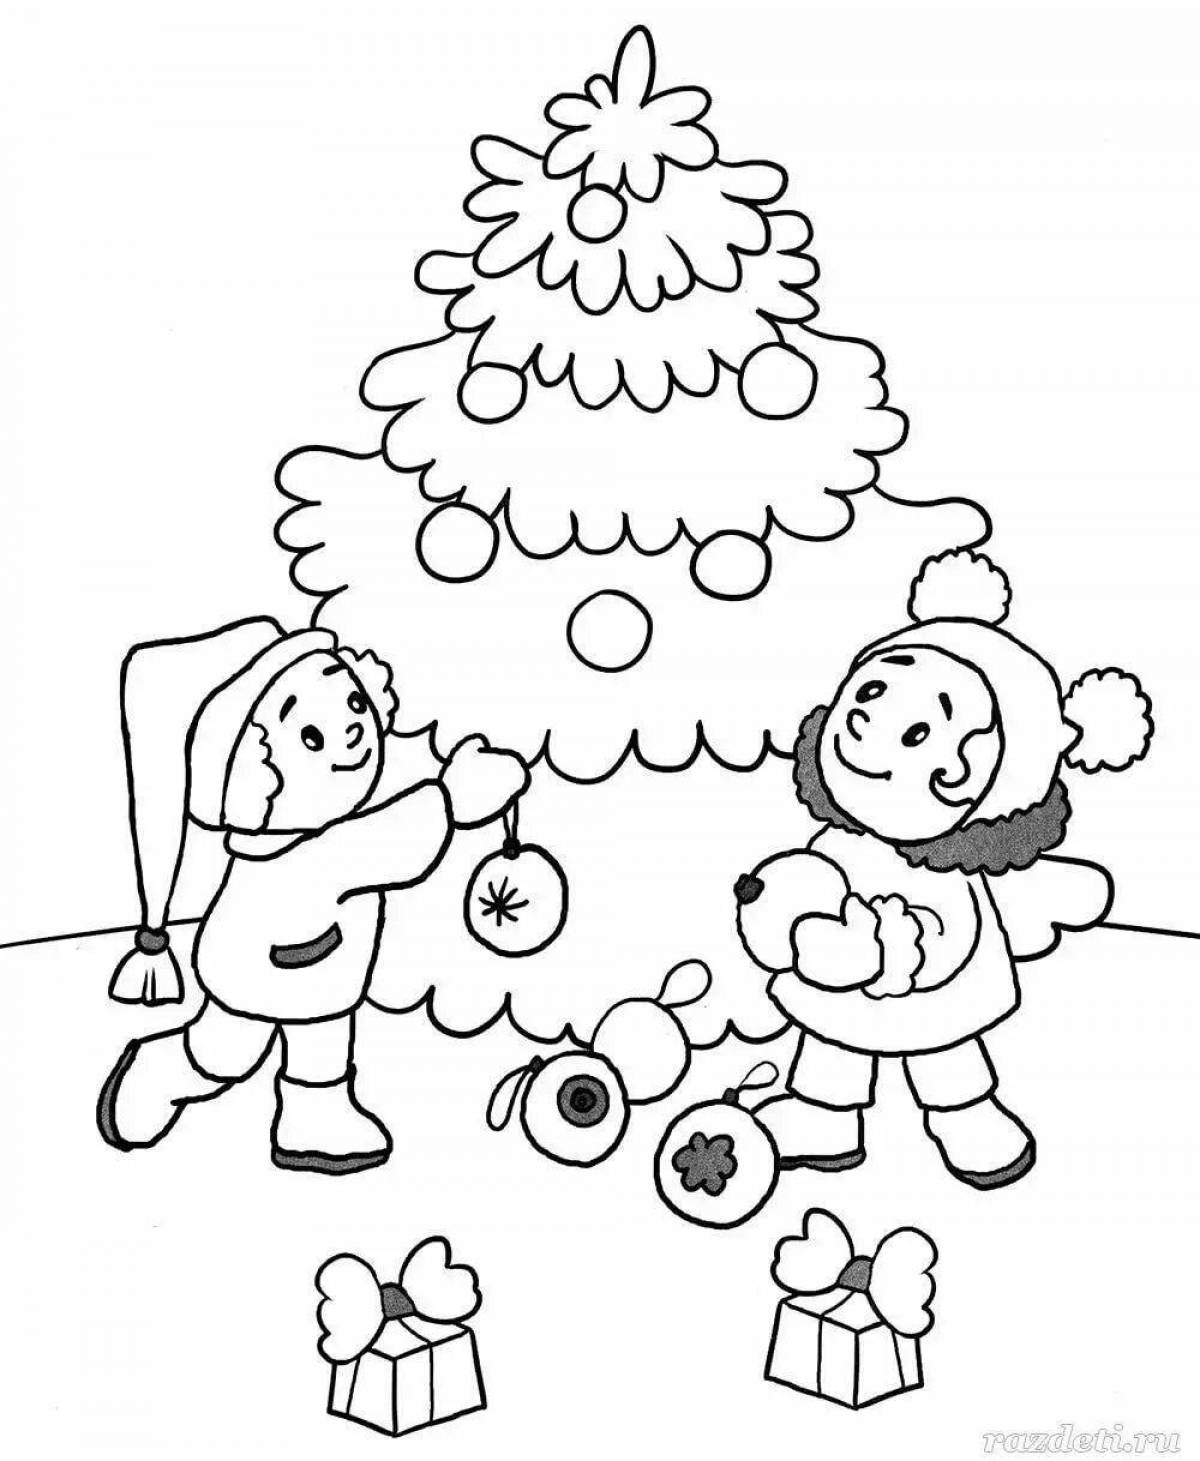 Playful winter Christmas coloring book